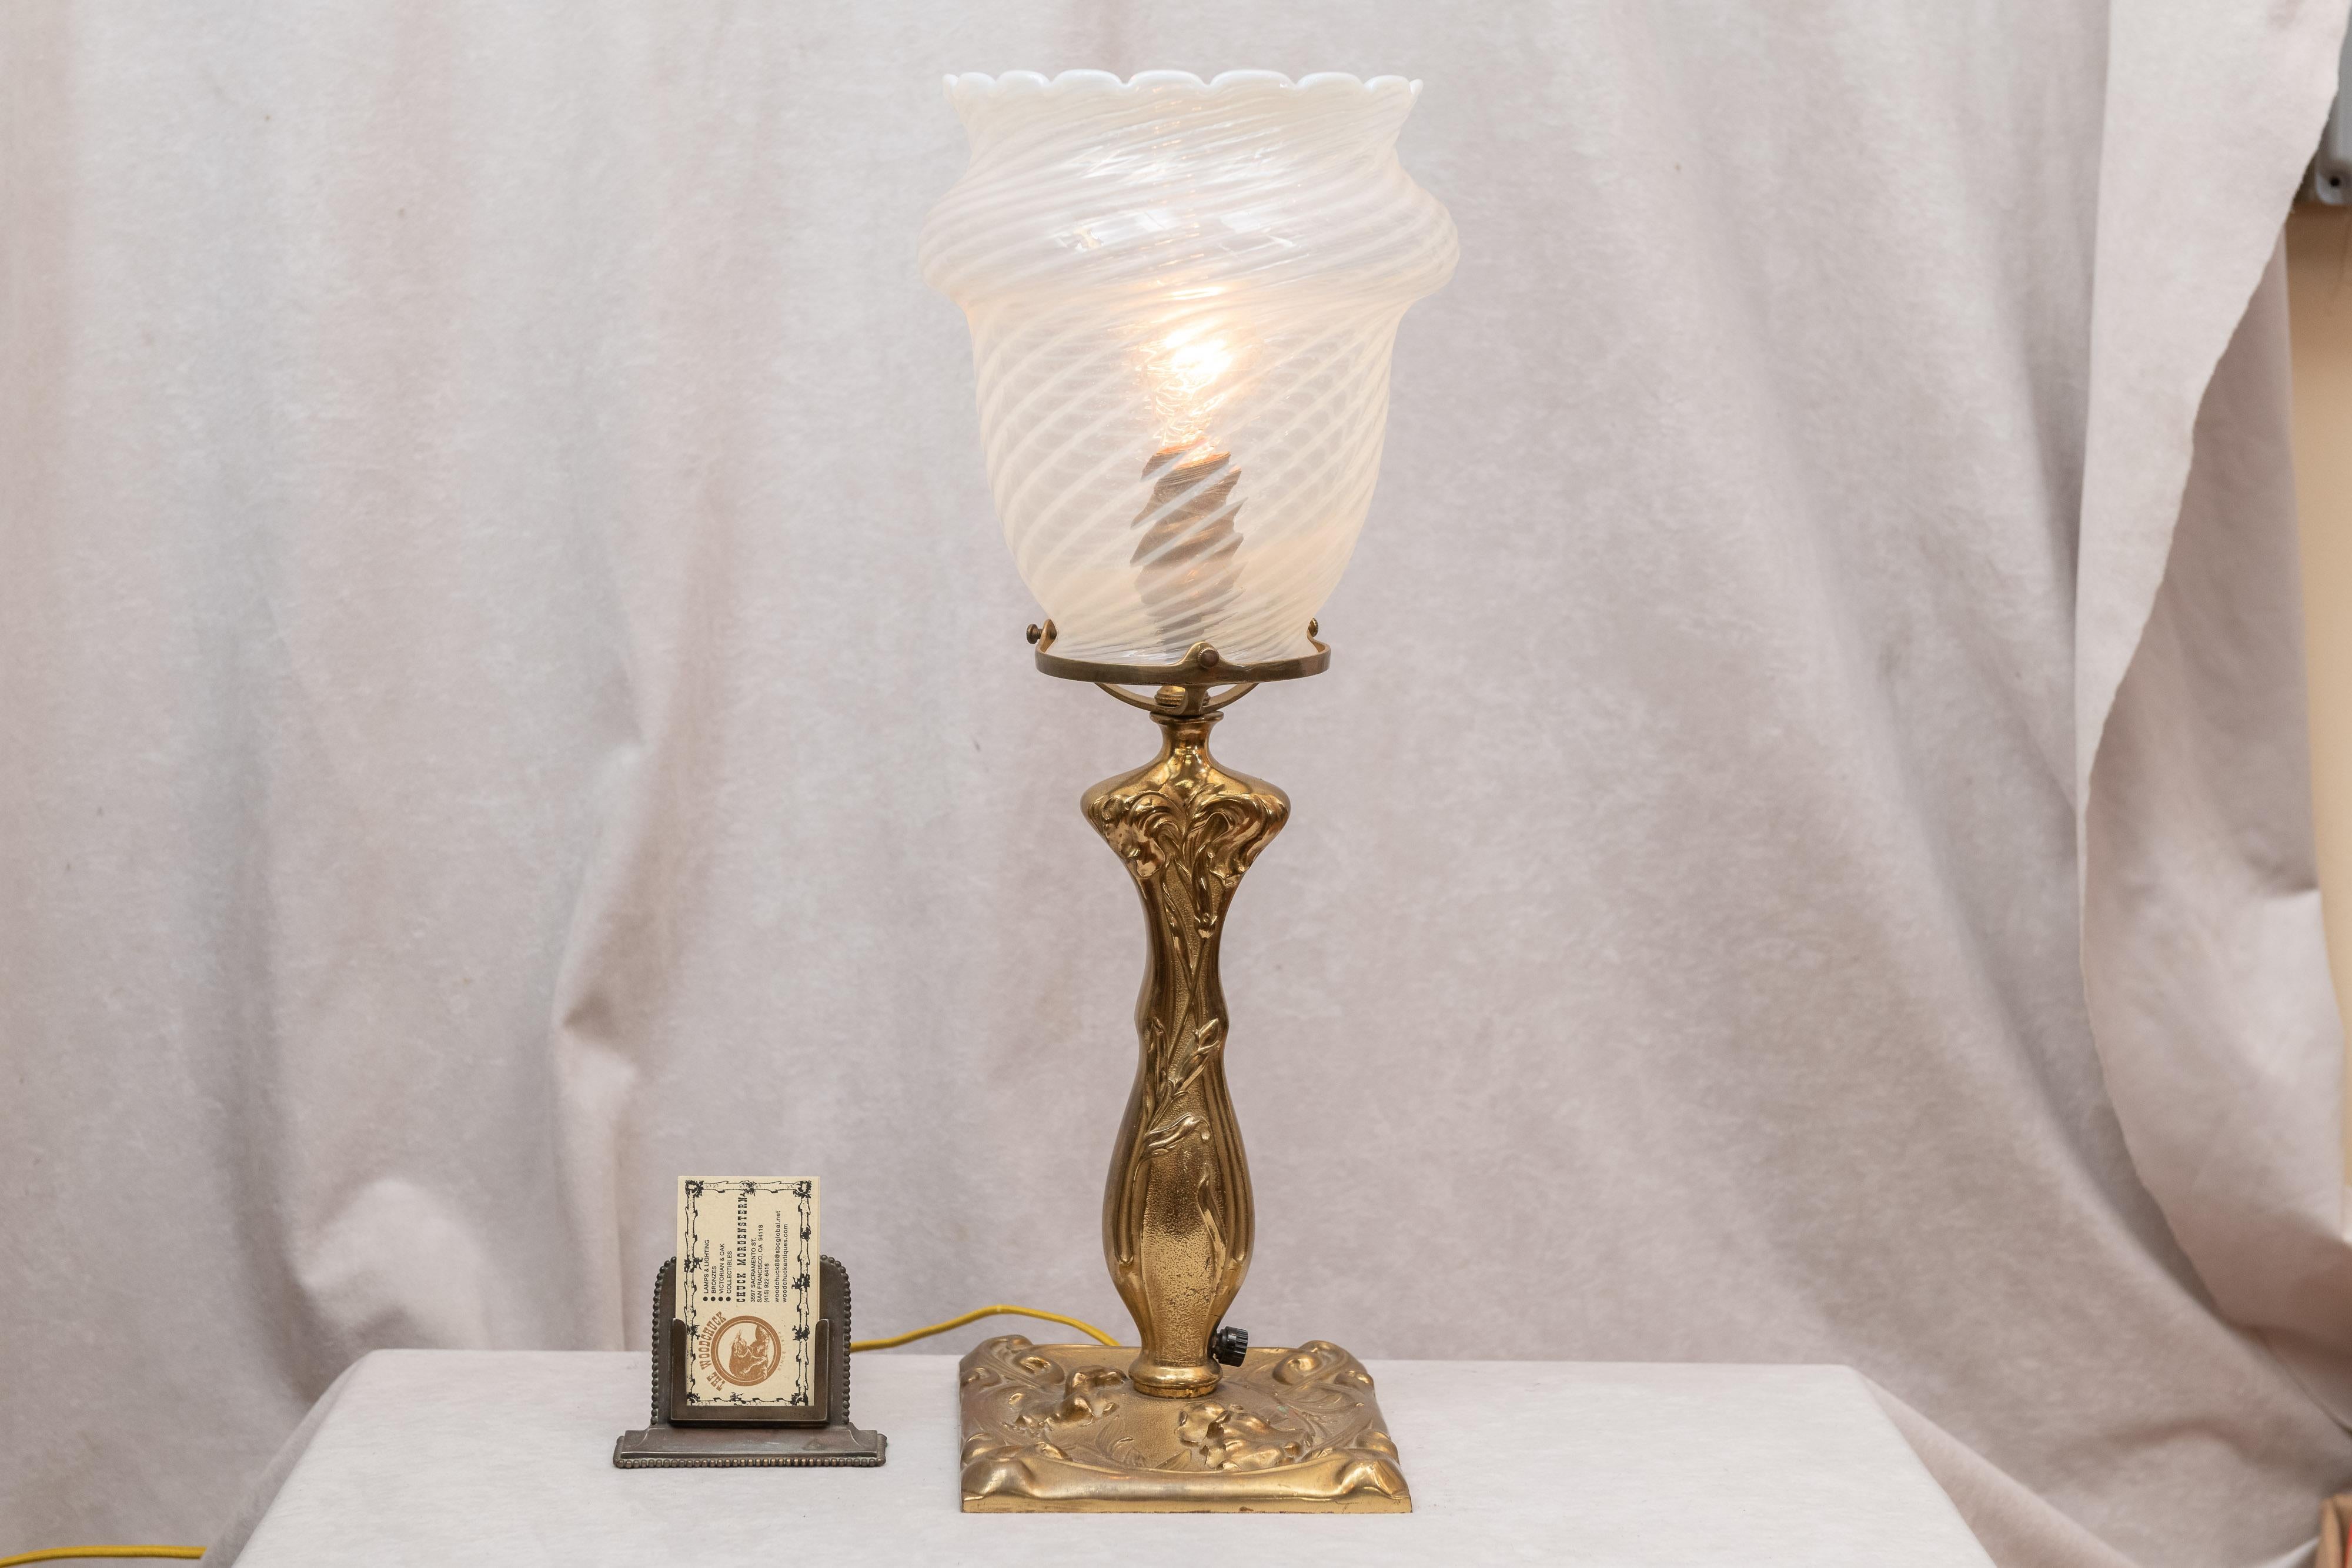 We had this wonderful Art Nouveau bronze lamp base and we waited for a glass shade that would compliment, and so years later we found a shade that we thinks works fine. The shade is very large and dynamic and is hand blown. We refer to that glass as